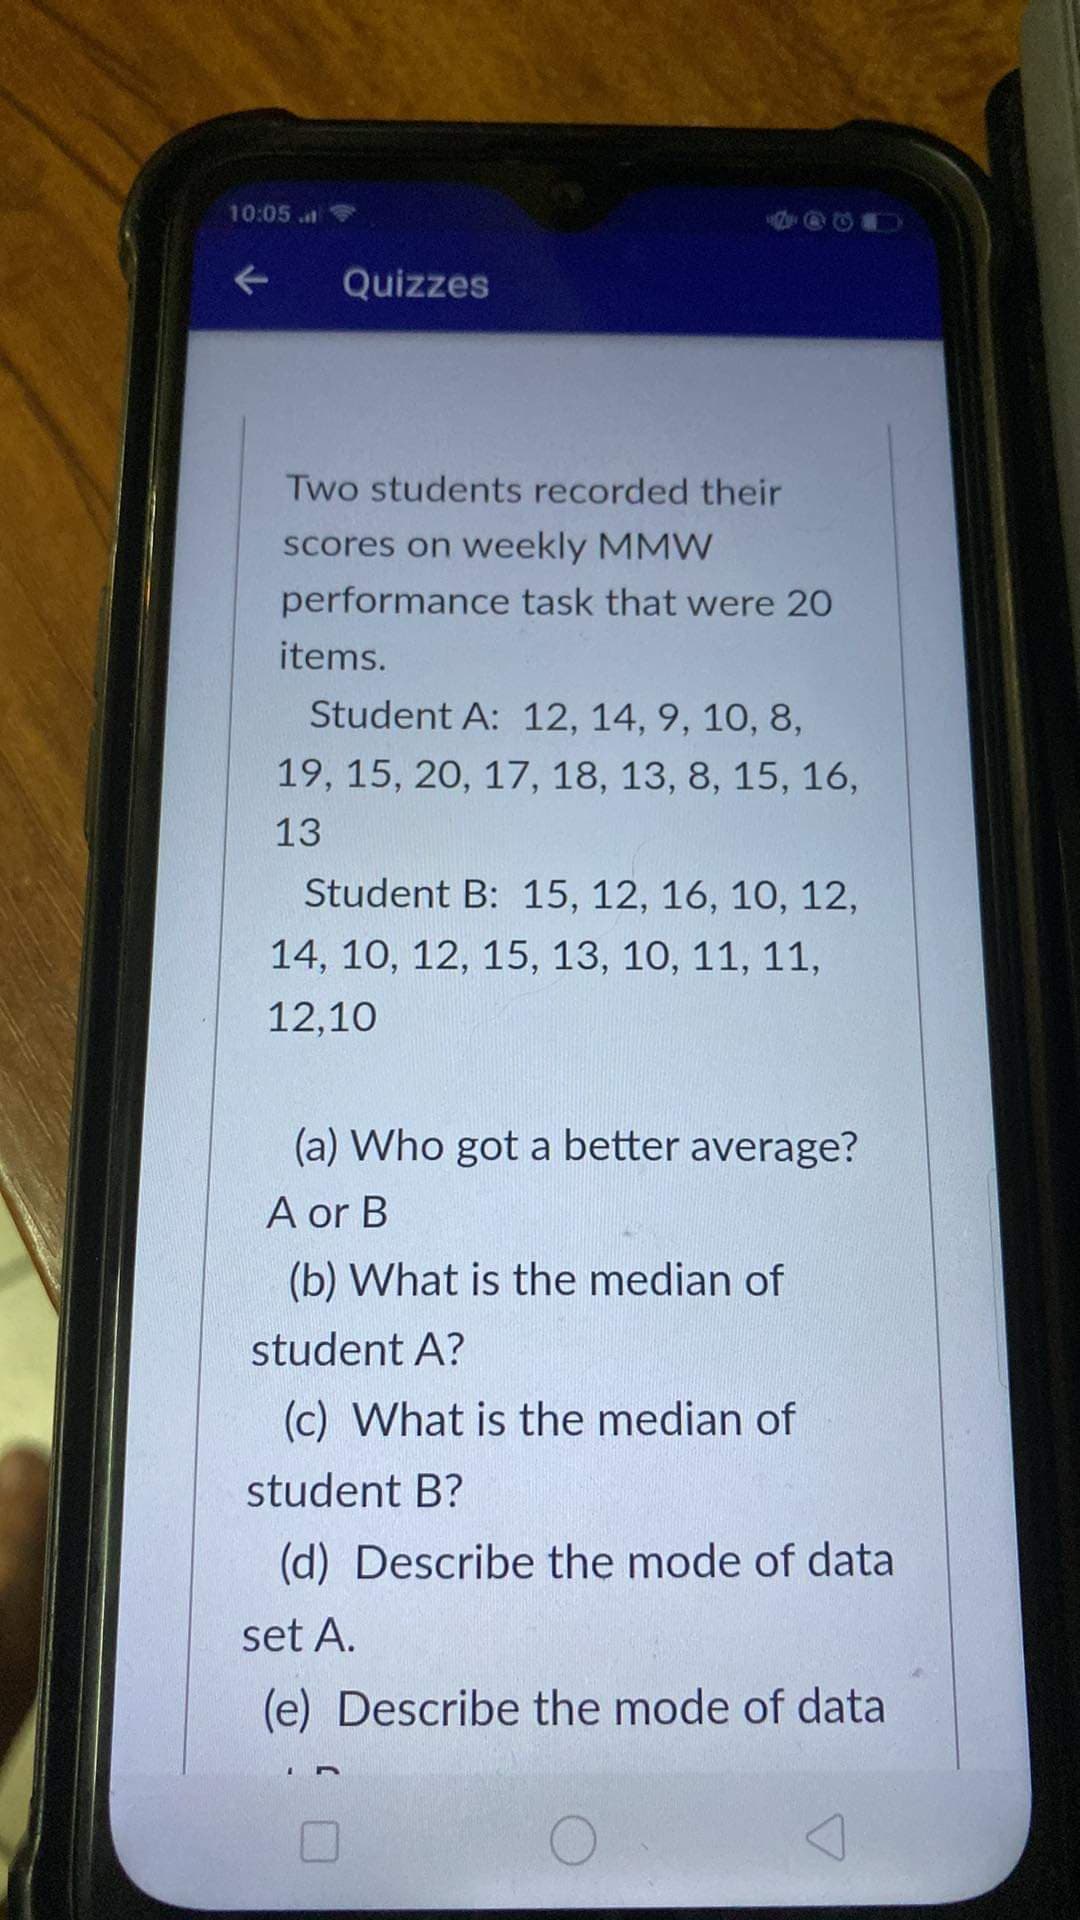 10:05
Quizzes
Two students recorded their
scores on weekly MMW
performance task that were 20
items.
Student A: 12, 14, 9, 10, 8,
19, 15, 20, 17, 18, 13, 8, 15, 16,
13
Student B: 15, 12, 16, 10, 12,
14, 10, 12, 15, 13, 10, 11, 11,
12,10
(a) Who got a better average?
A or B
(b) What is the median of
student A?
(c) What is the median of
student B?
(d) Describe the mode of data
set A.
(e) Describe the mode of data
